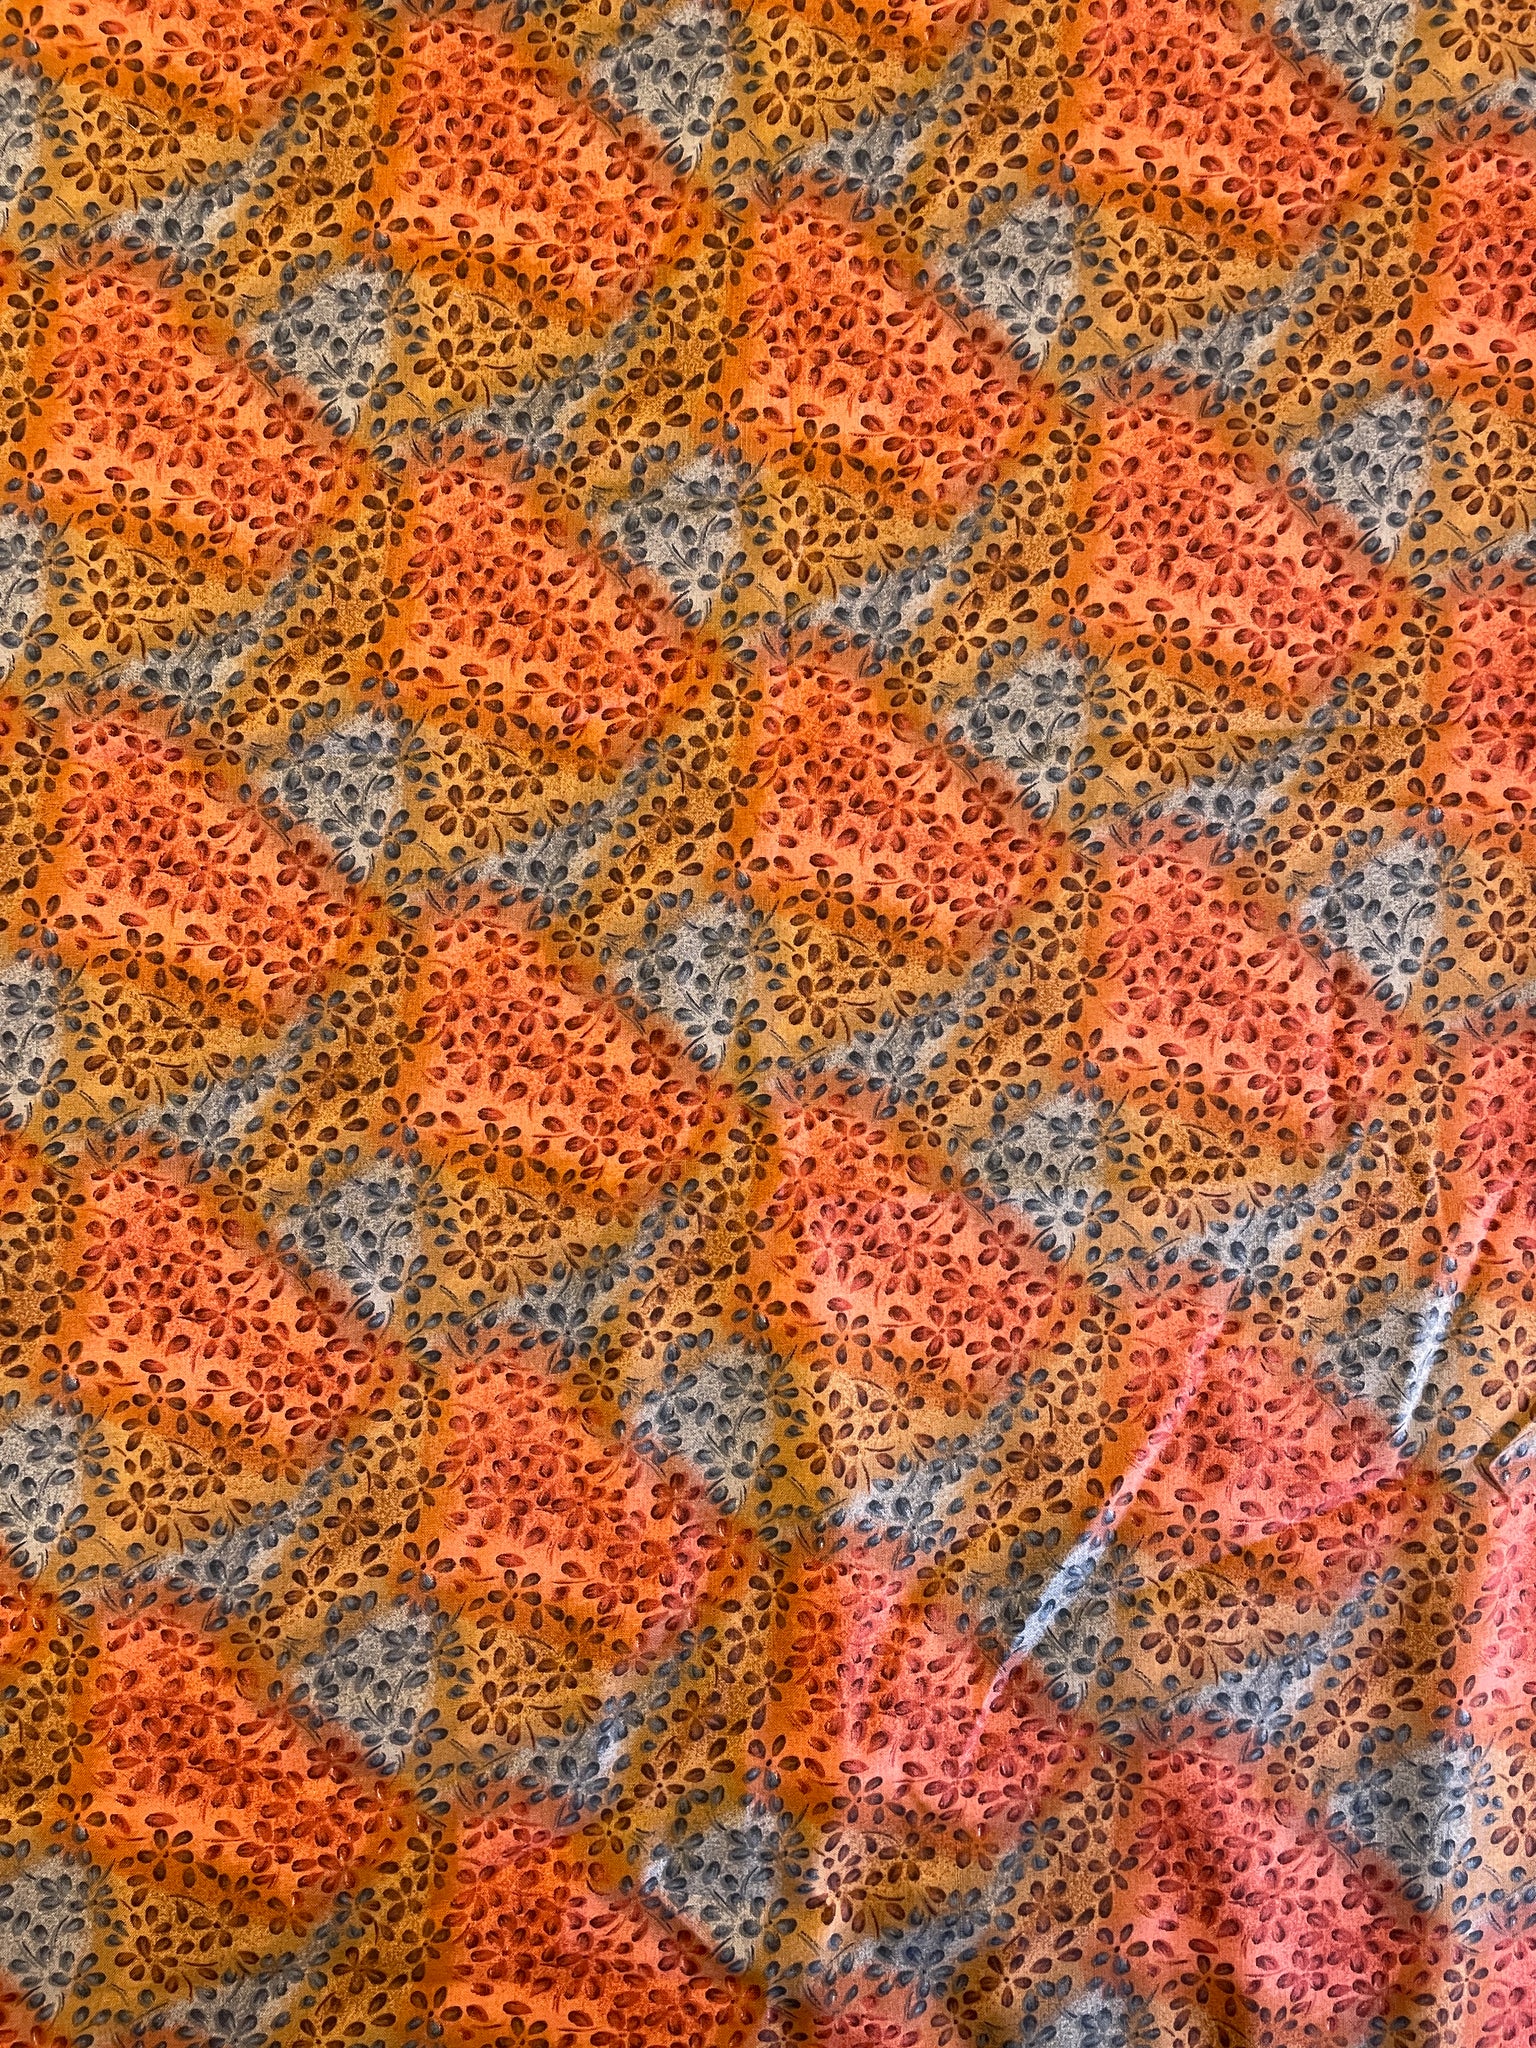 Quilting Cotton - Mottled Autumn Colors over Flowers